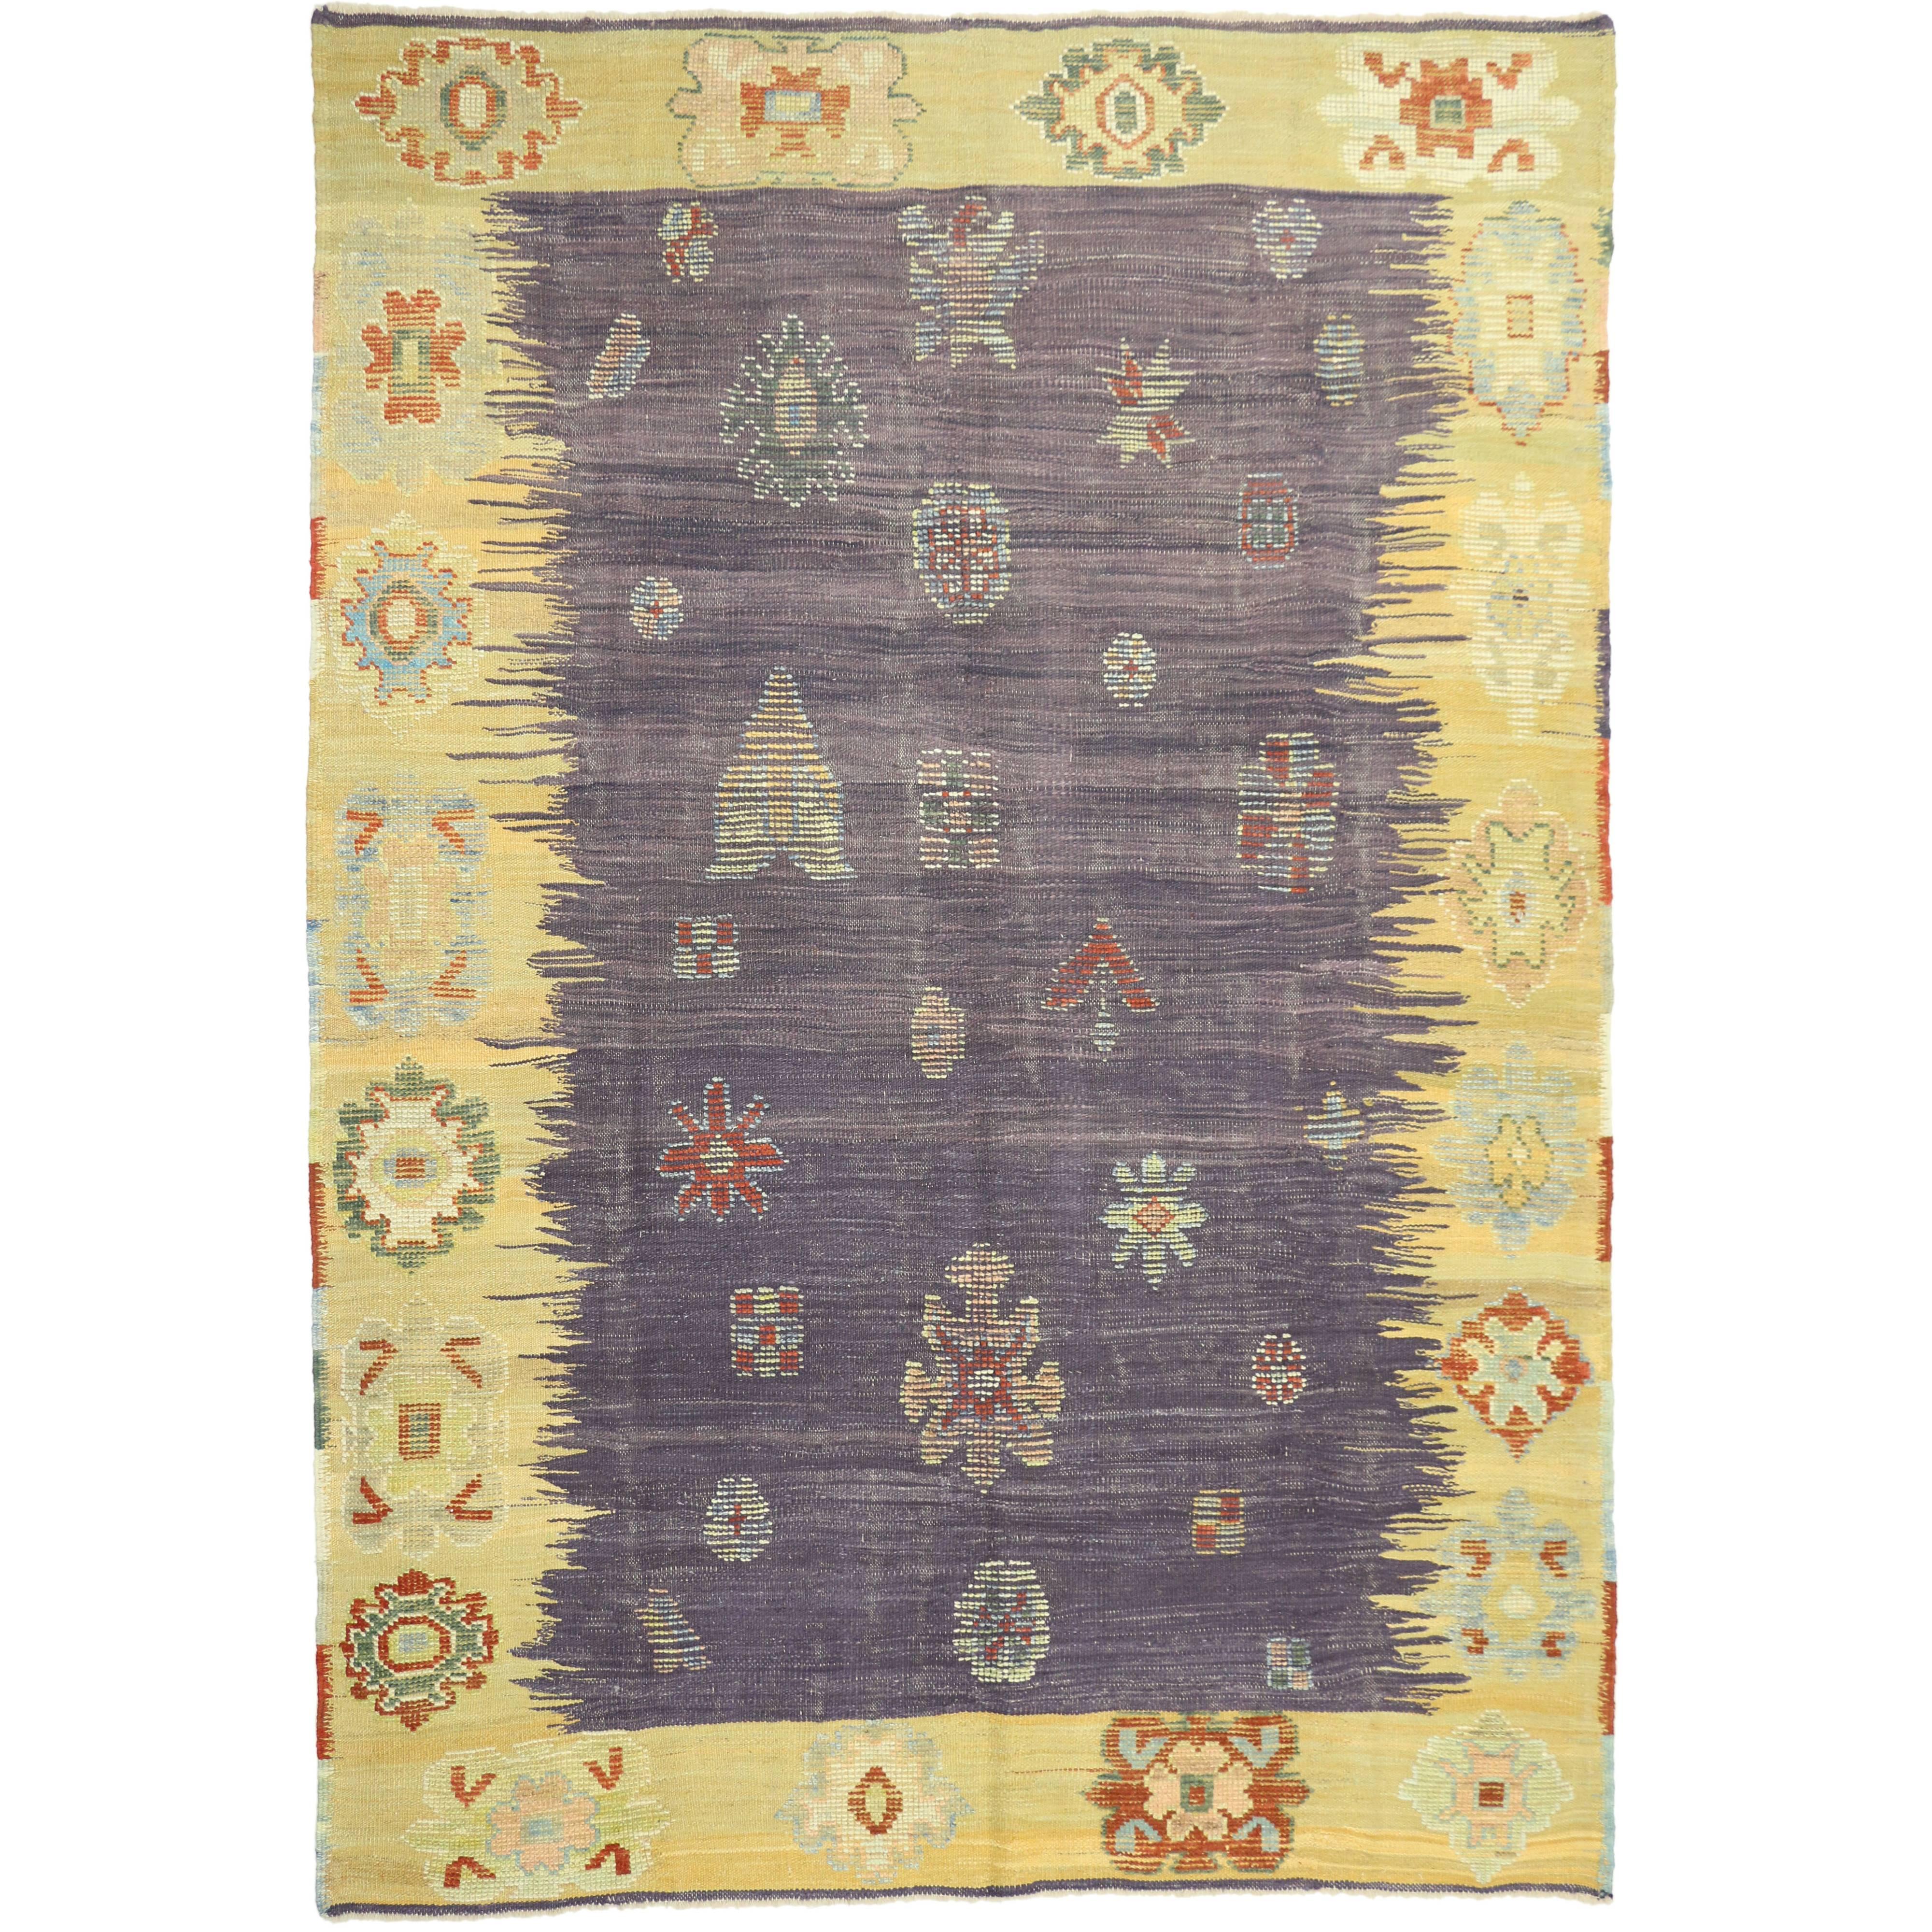 Contemporary Turkish Kilim Rug with Tribal Style